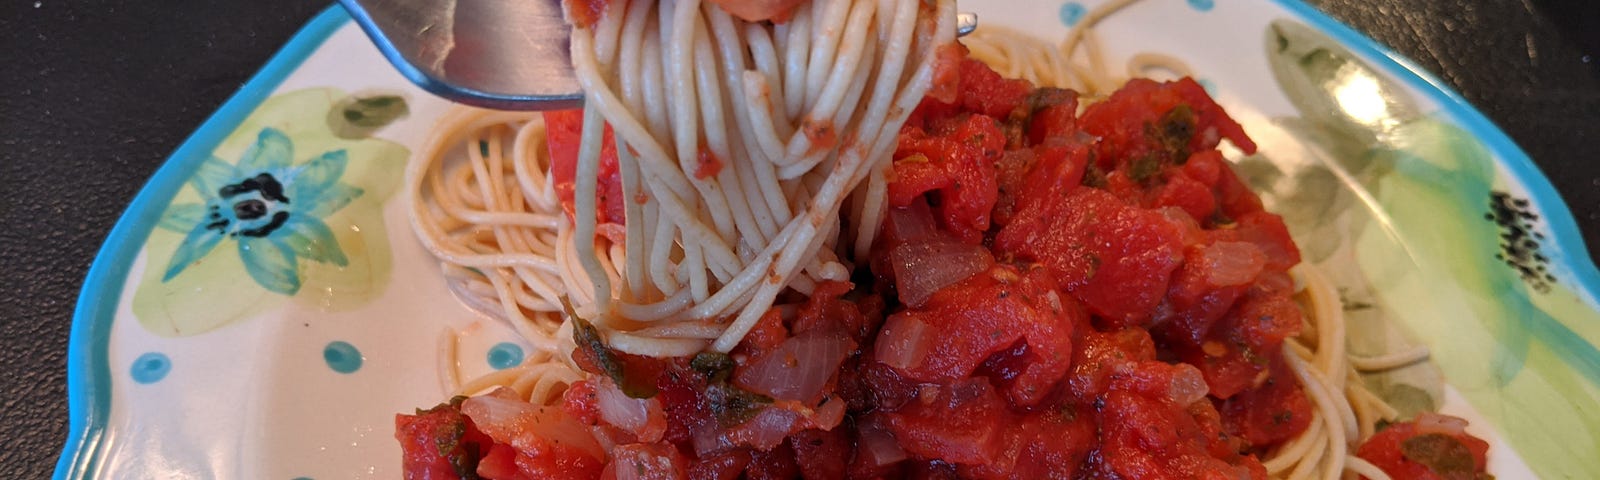 A plate of plant-based spaghetti sauce served over spaghetti noodles.